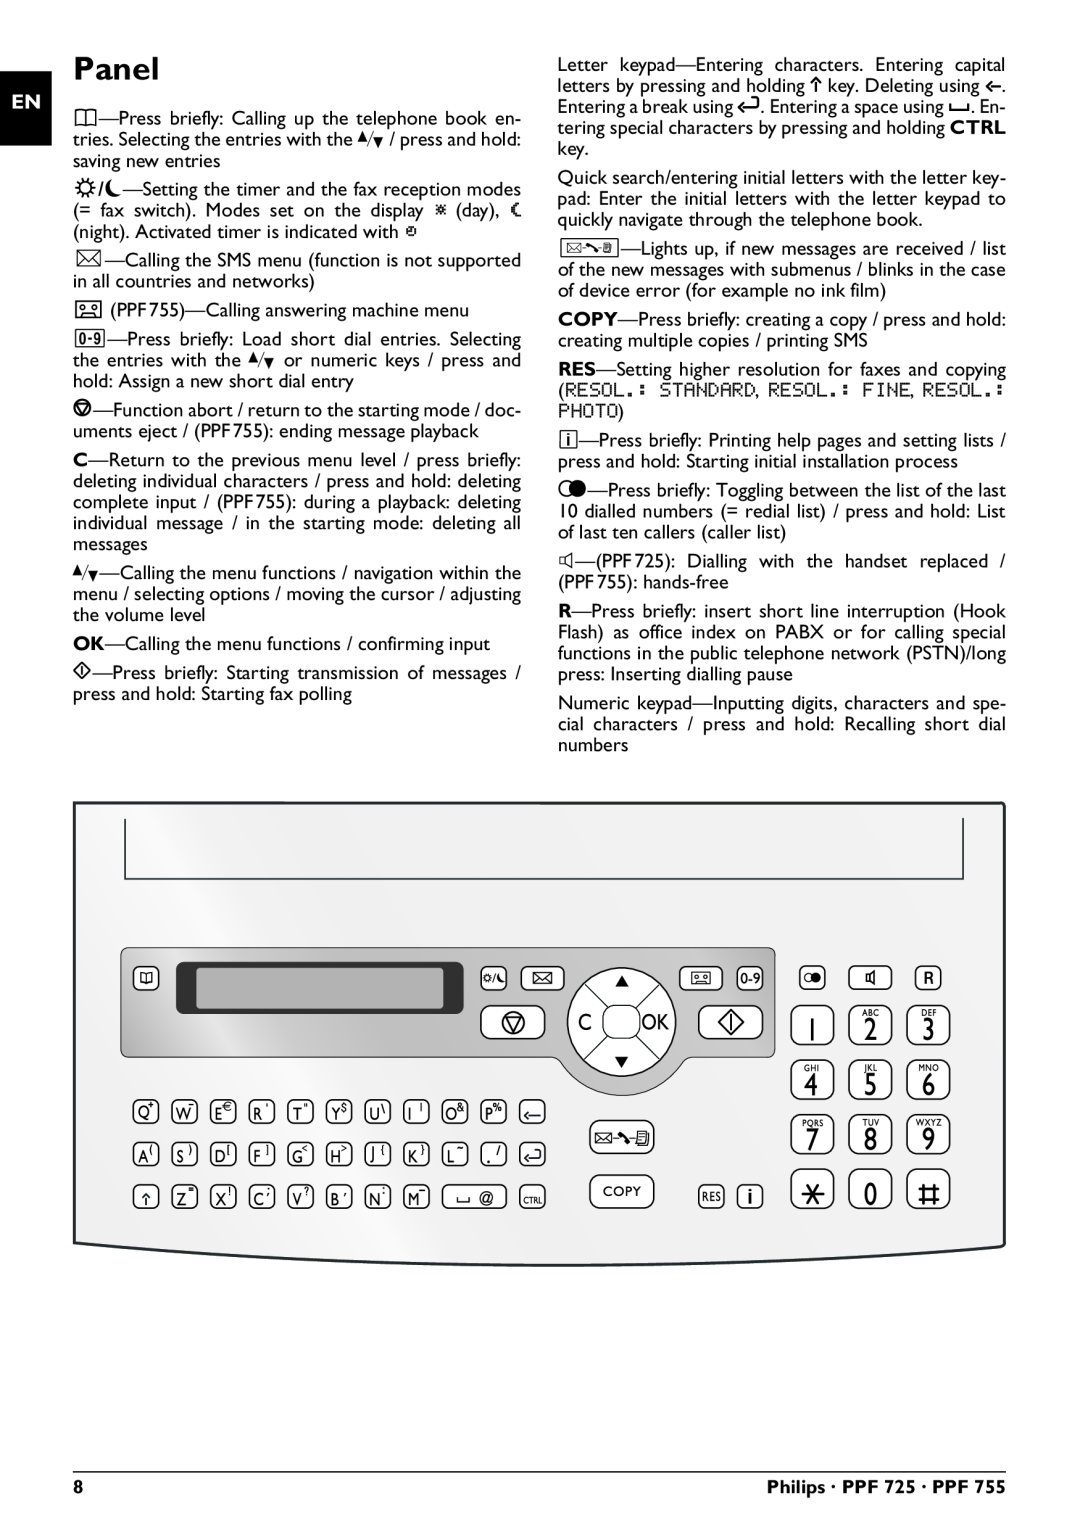 Philips PPF 755, PPF 725 user manual Panel 